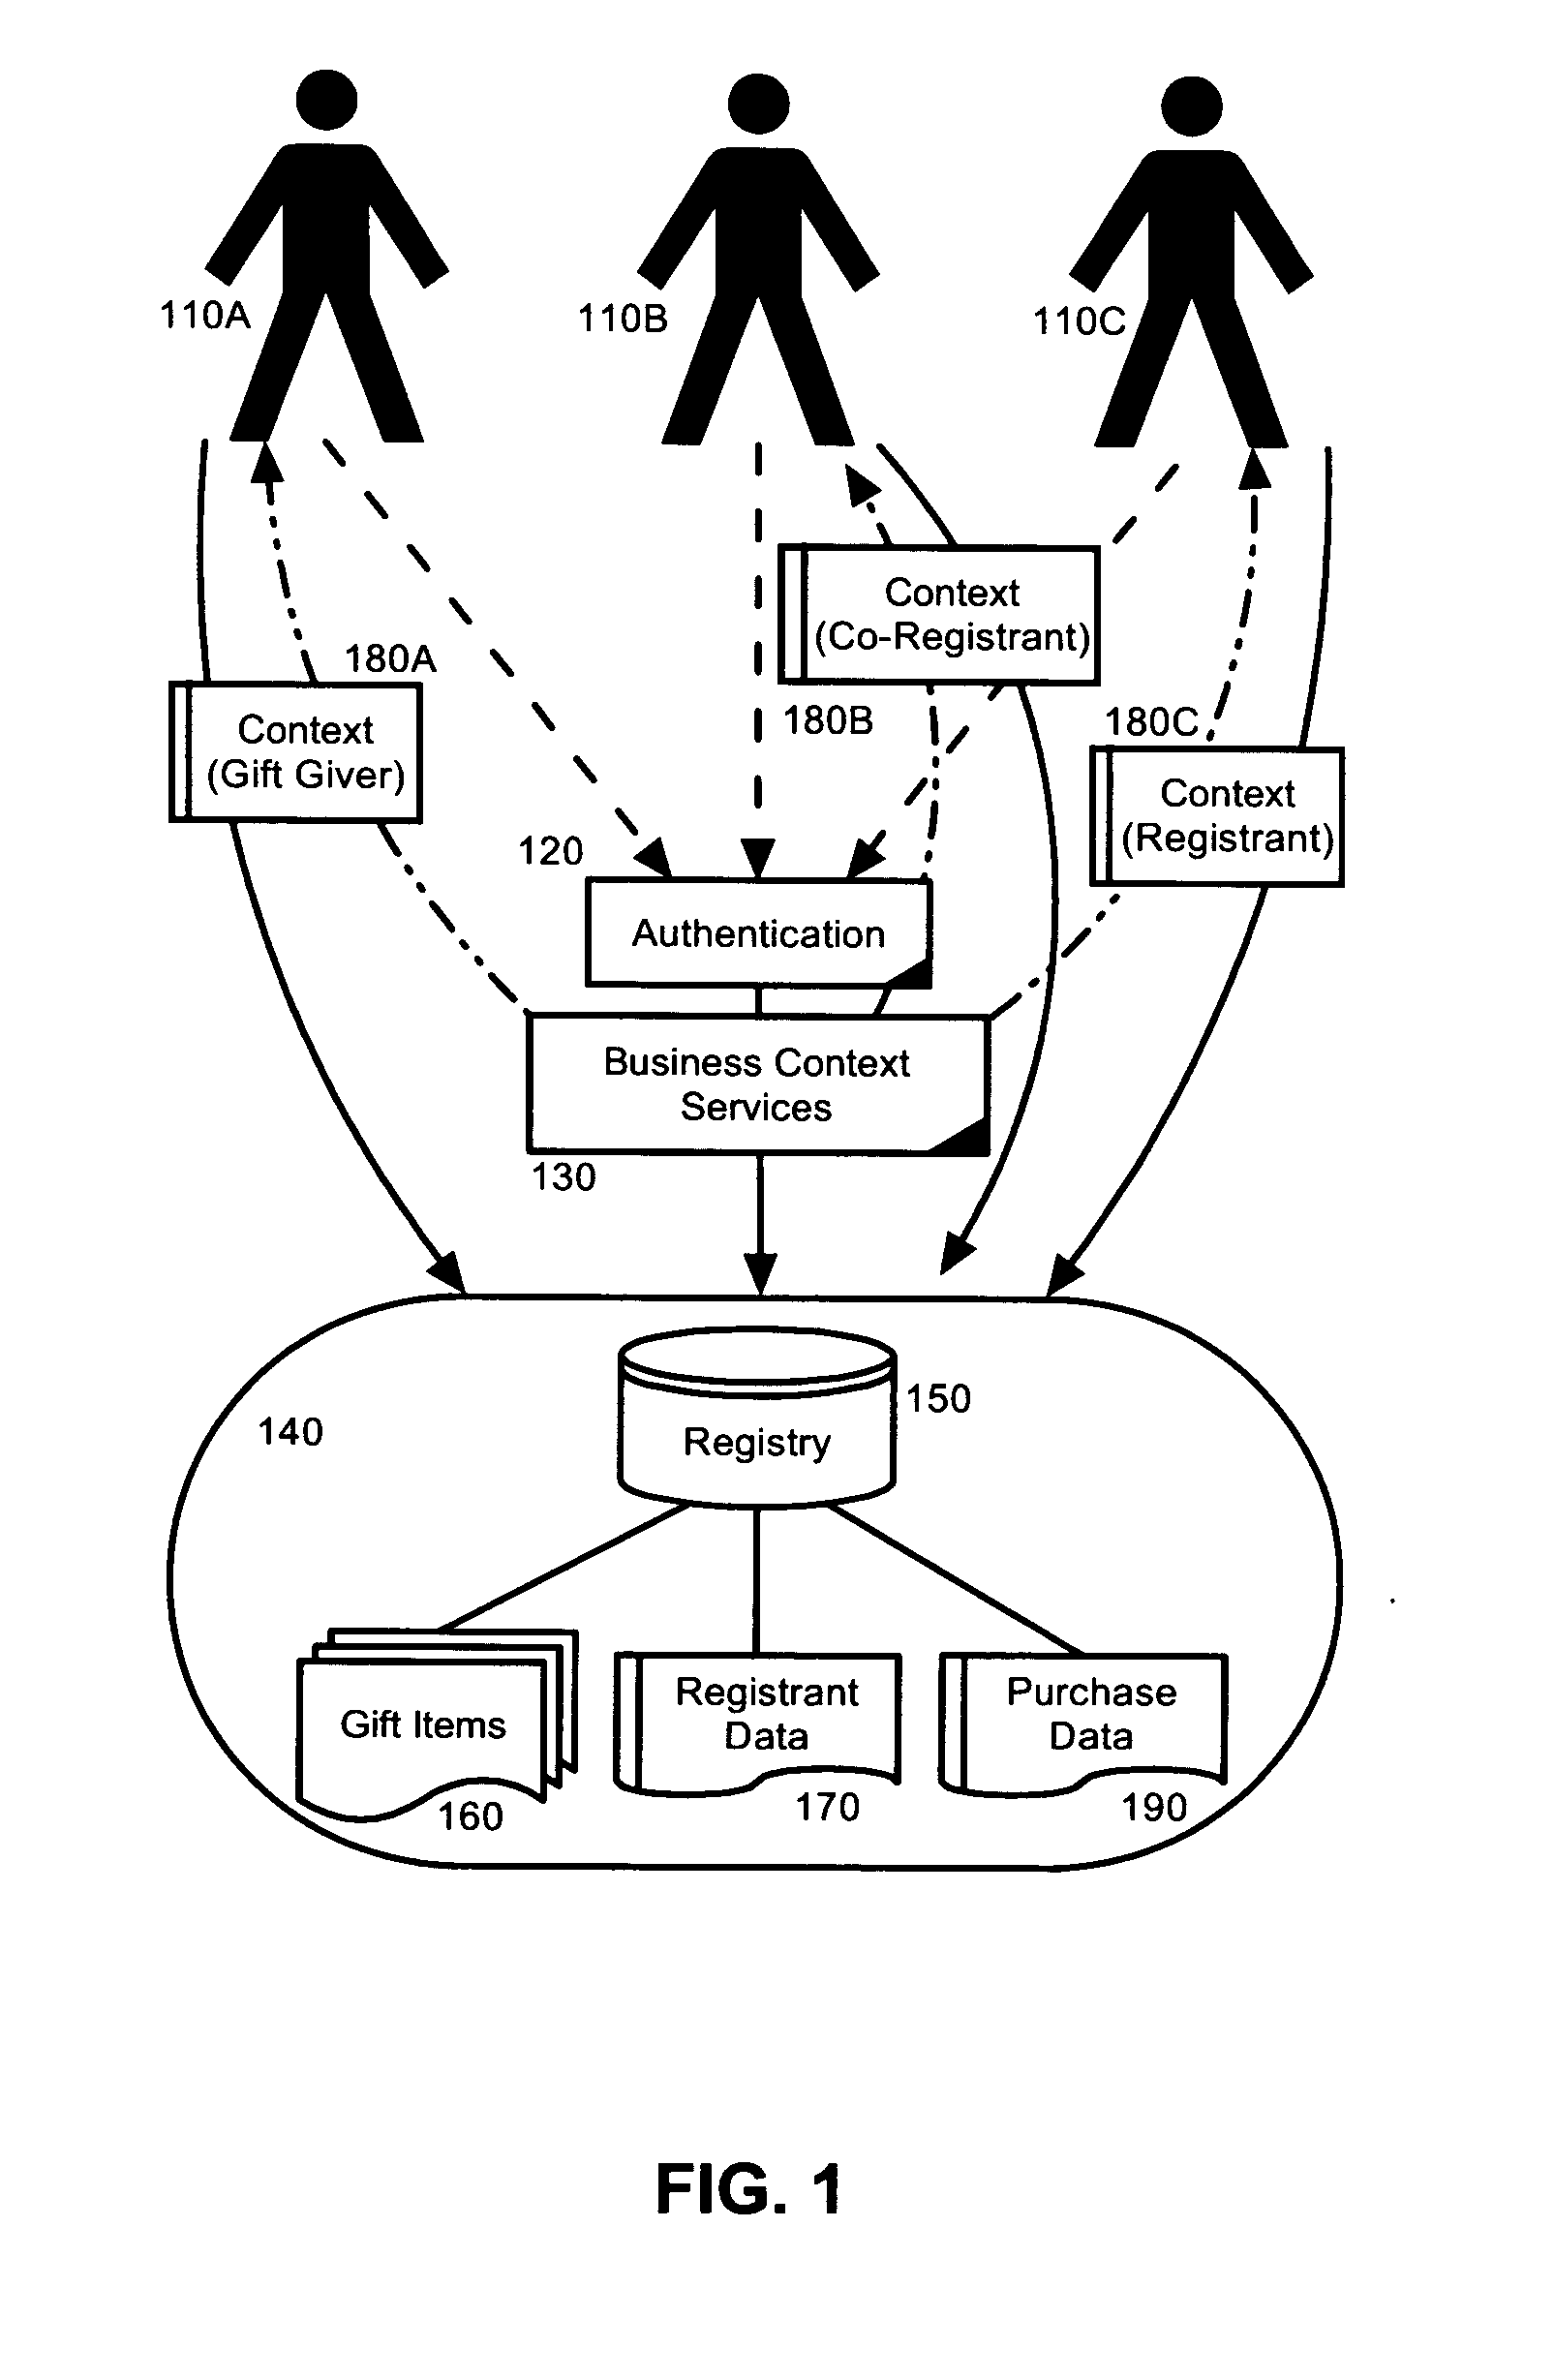 Gift registry management through business contexts in a service oriented architecture